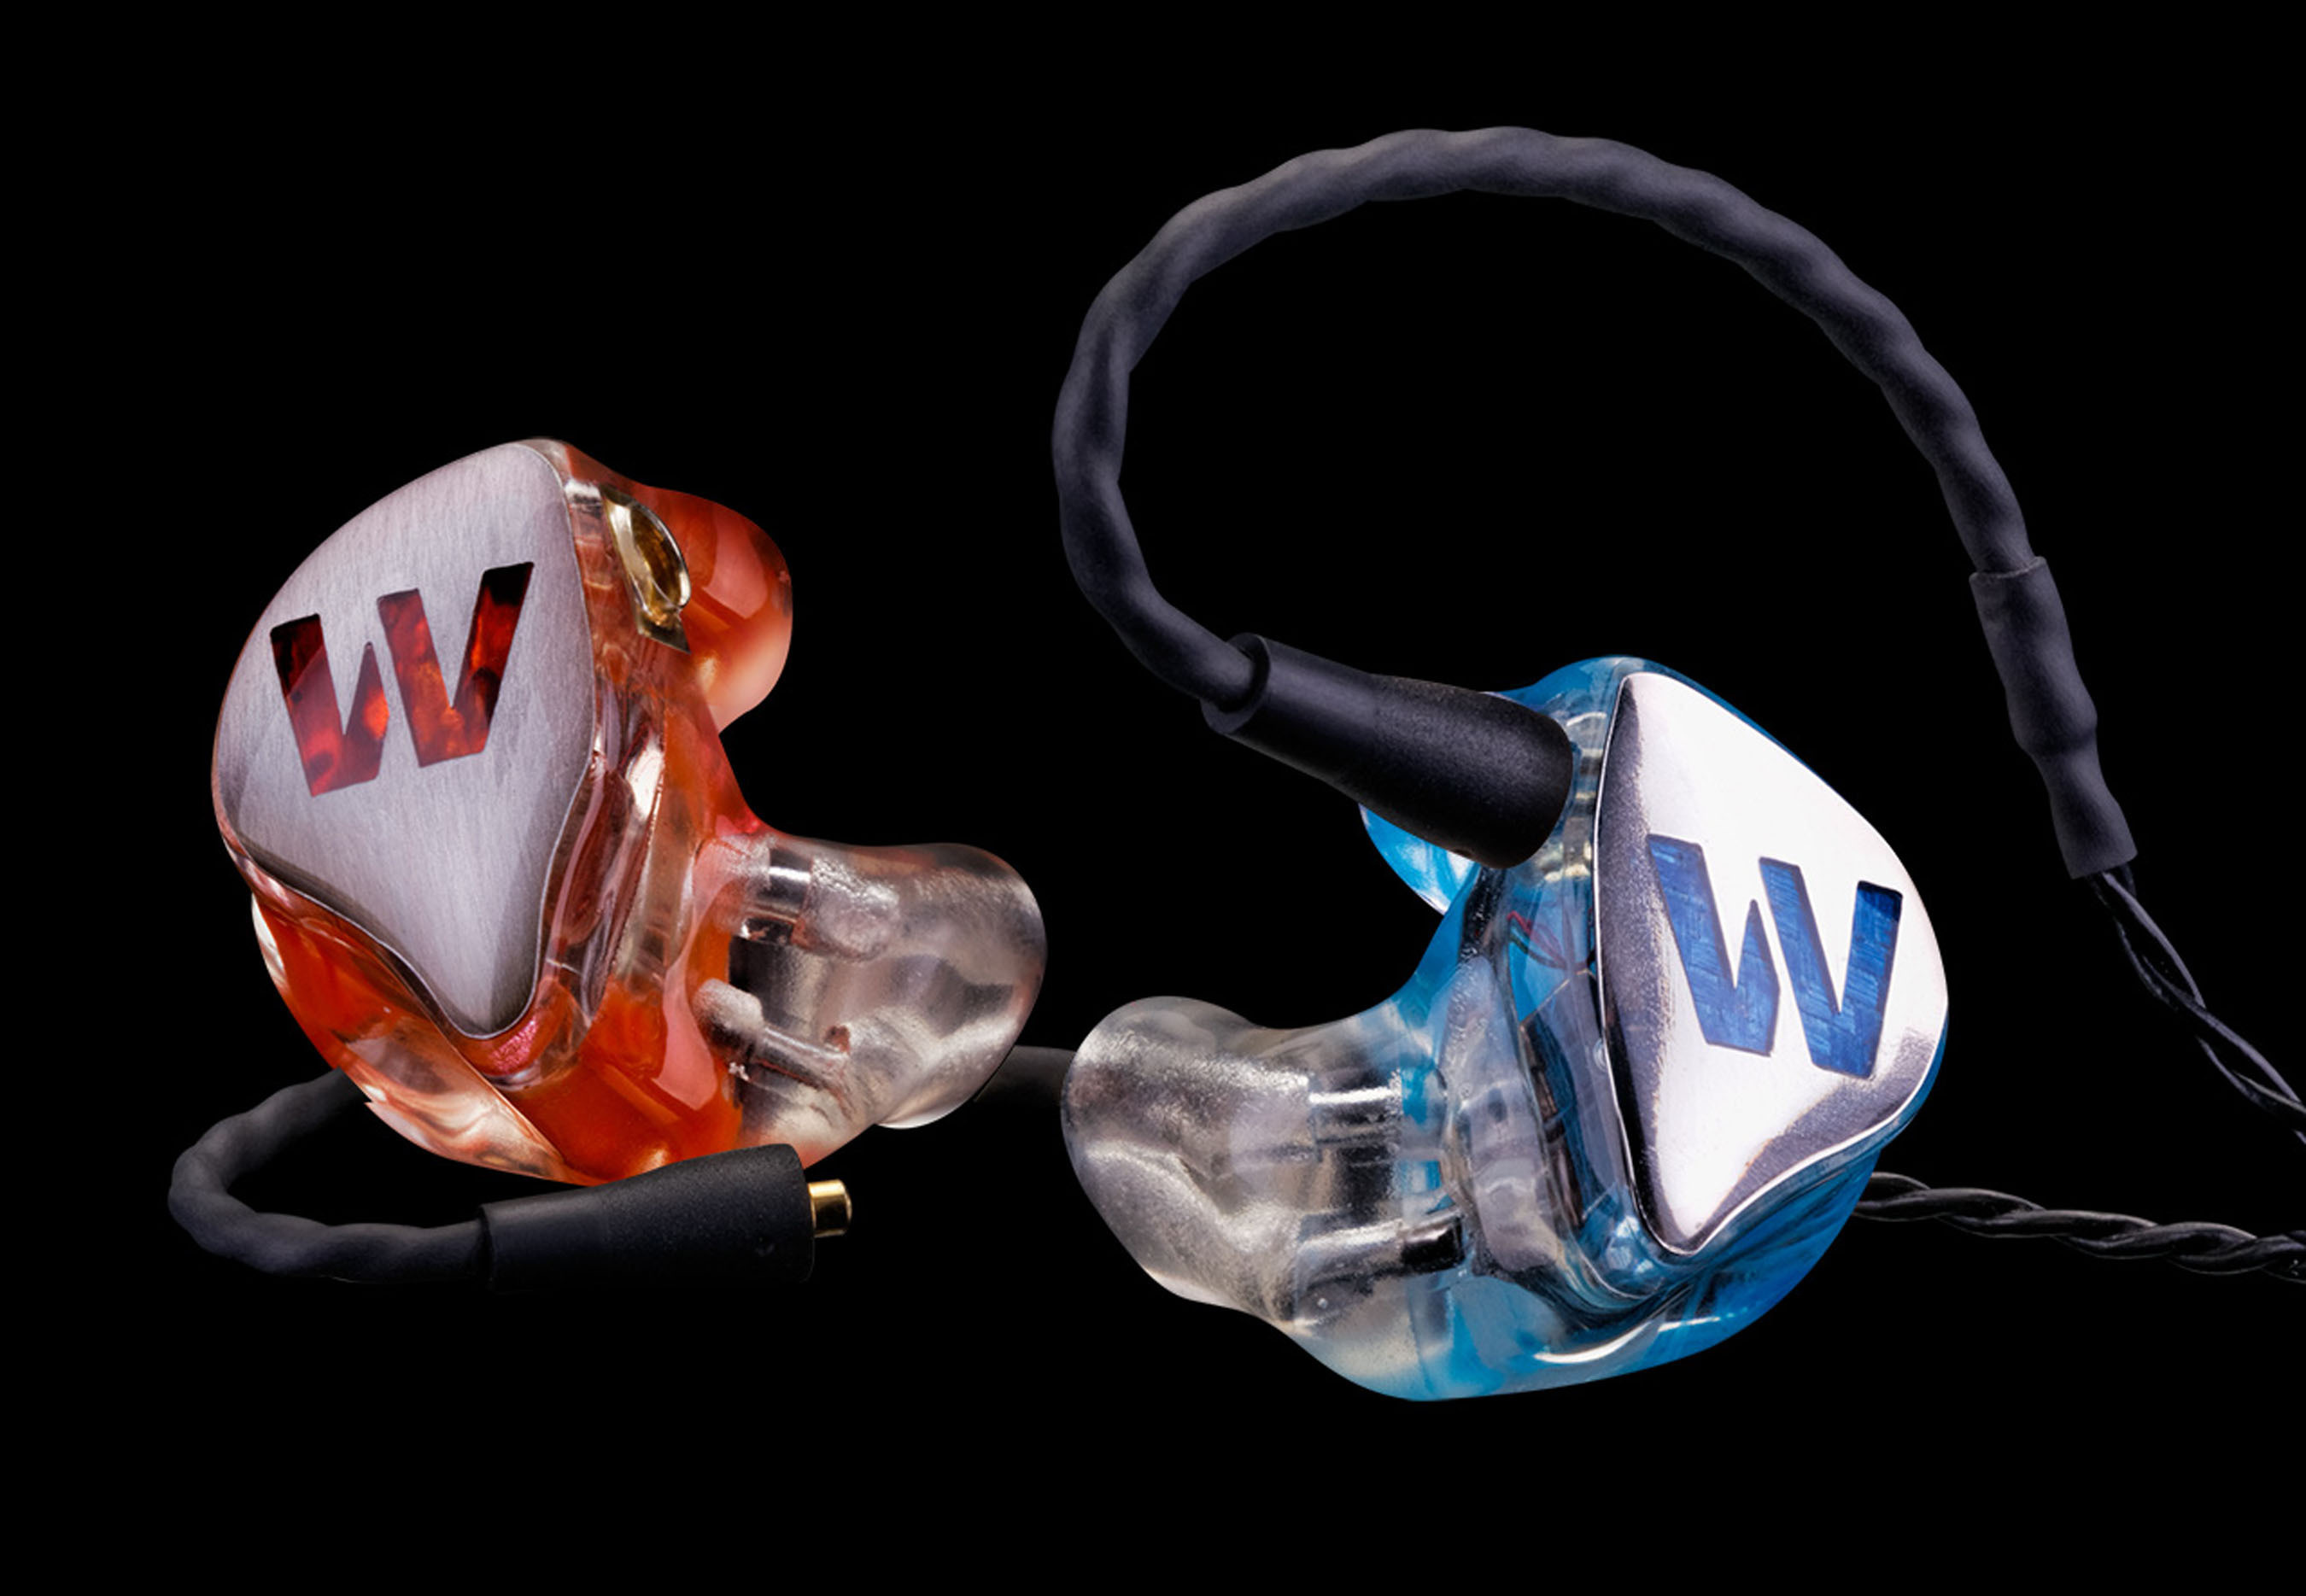 Westone unveils the much-anticipated Elite Series ES60 for the first time at NAMM (National Association of Music Merchants trade show.) The ES60 is the newest in-ear monitor in the Elite Series of high performance earphones designed by musicians specifically for music professionals and audiophiles. The ES60 features Westone's legendary custom True-Fit technology, providing the musician with earpieces that are cast, sculpted and polished by hand from actual impressions of the individual's ears. (PRNewsFoto/Westone) (PRNewsFoto/WESTONE)